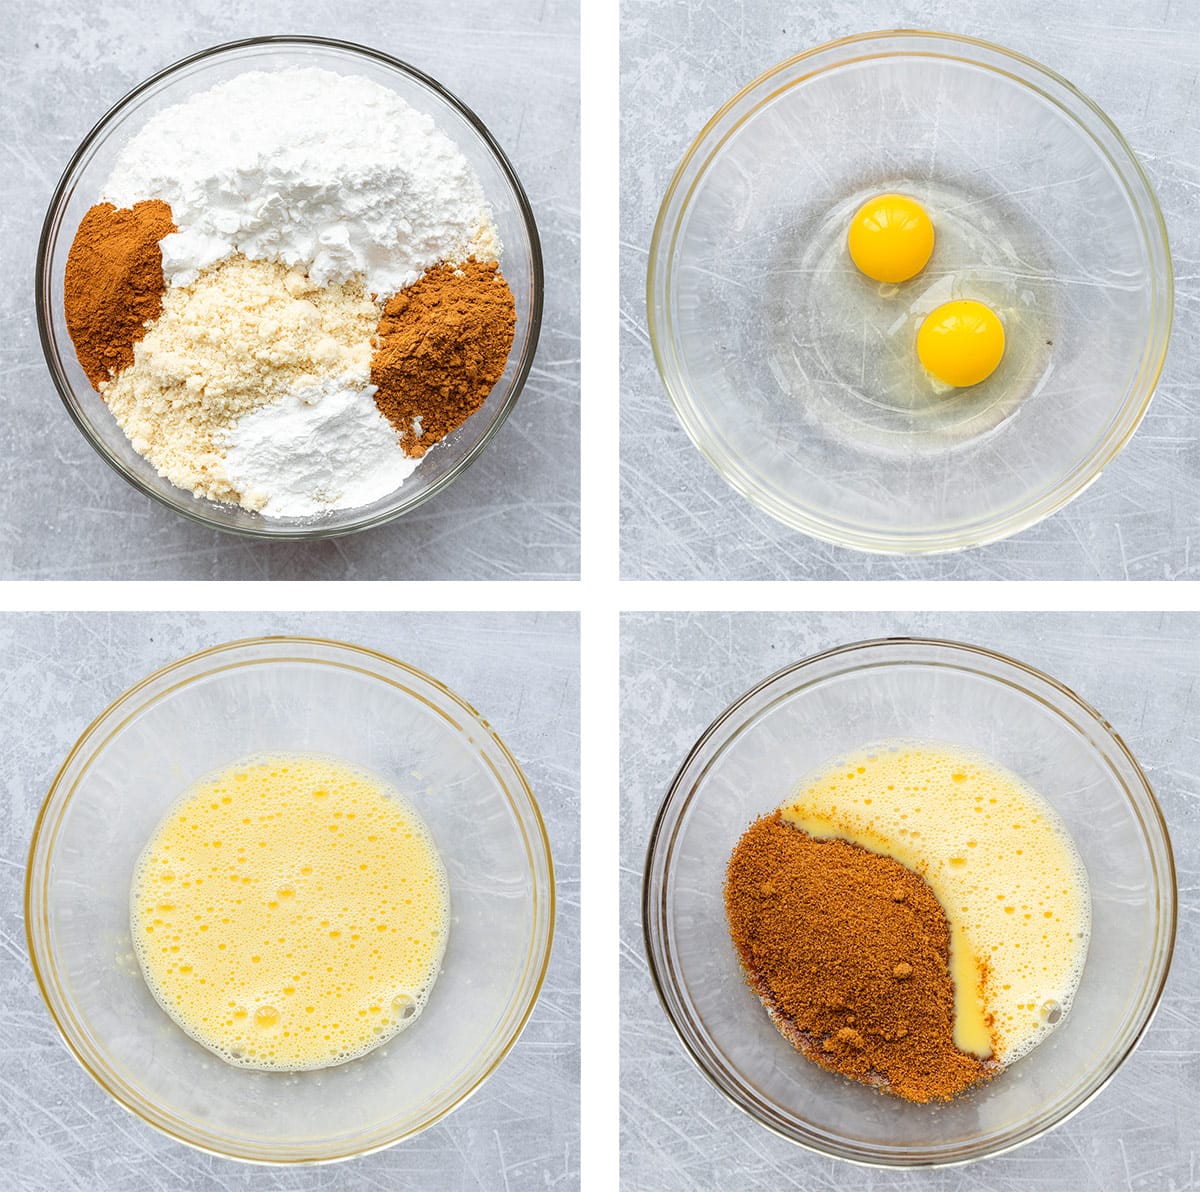 Step by step photos showing how to mix dry ingredients together, how to whisk eggs and mix in sugar.